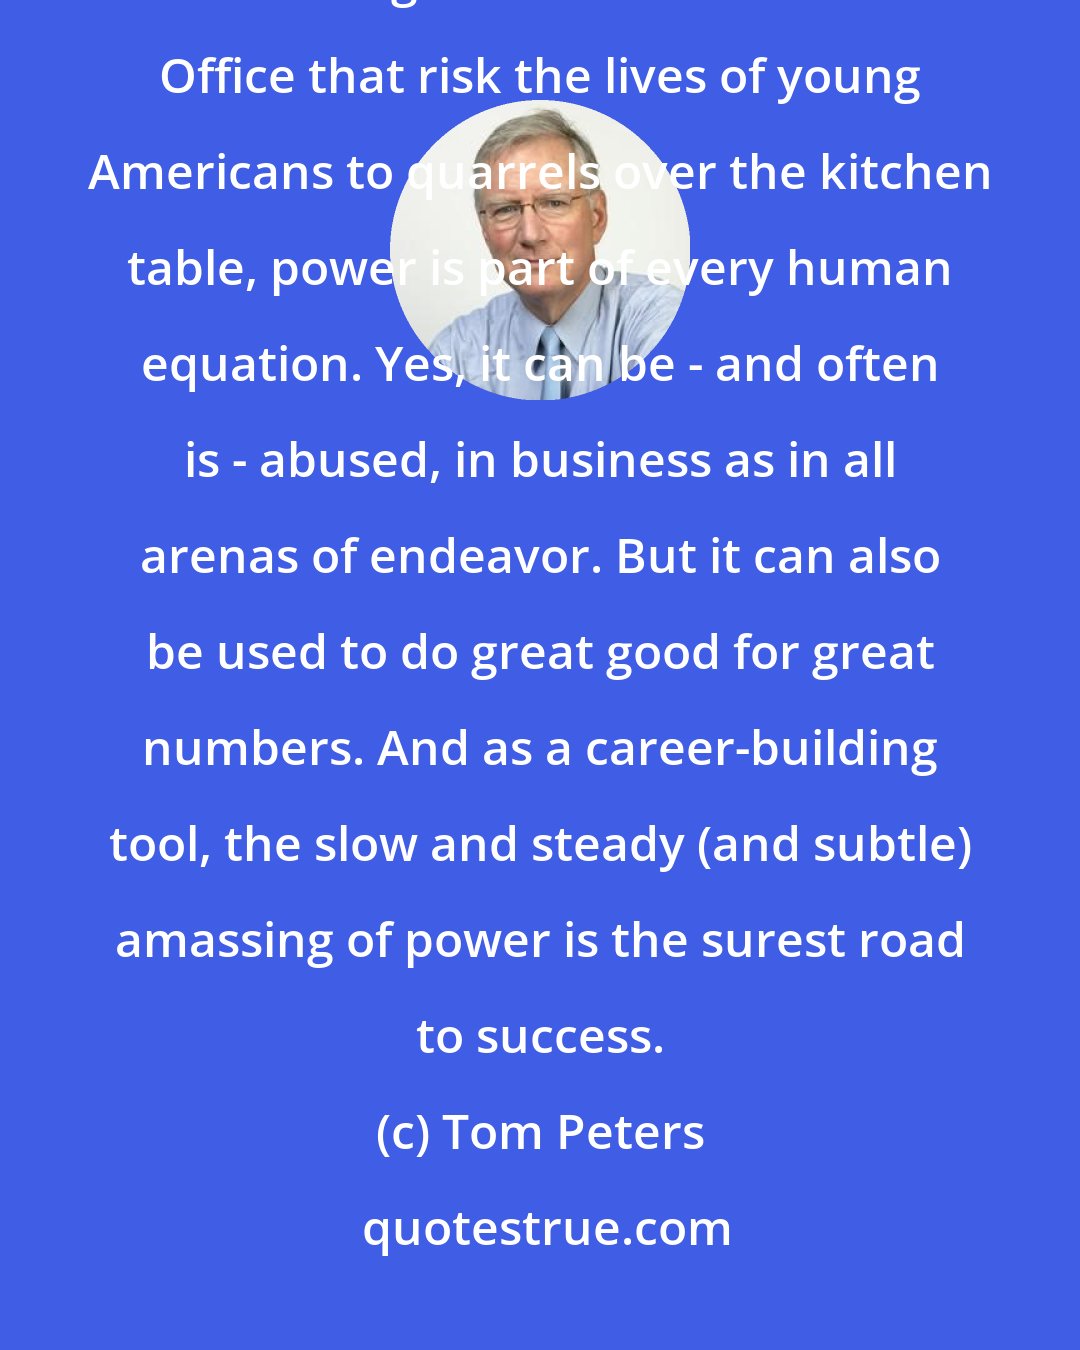 Tom Peters: Like it or not - and often we don't - power is a pervasive phenomenon. From midnight decisions in the Oval Office that risk the lives of young Americans to quarrels over the kitchen table, power is part of every human equation. Yes, it can be - and often is - abused, in business as in all arenas of endeavor. But it can also be used to do great good for great numbers. And as a career-building tool, the slow and steady (and subtle) amassing of power is the surest road to success.